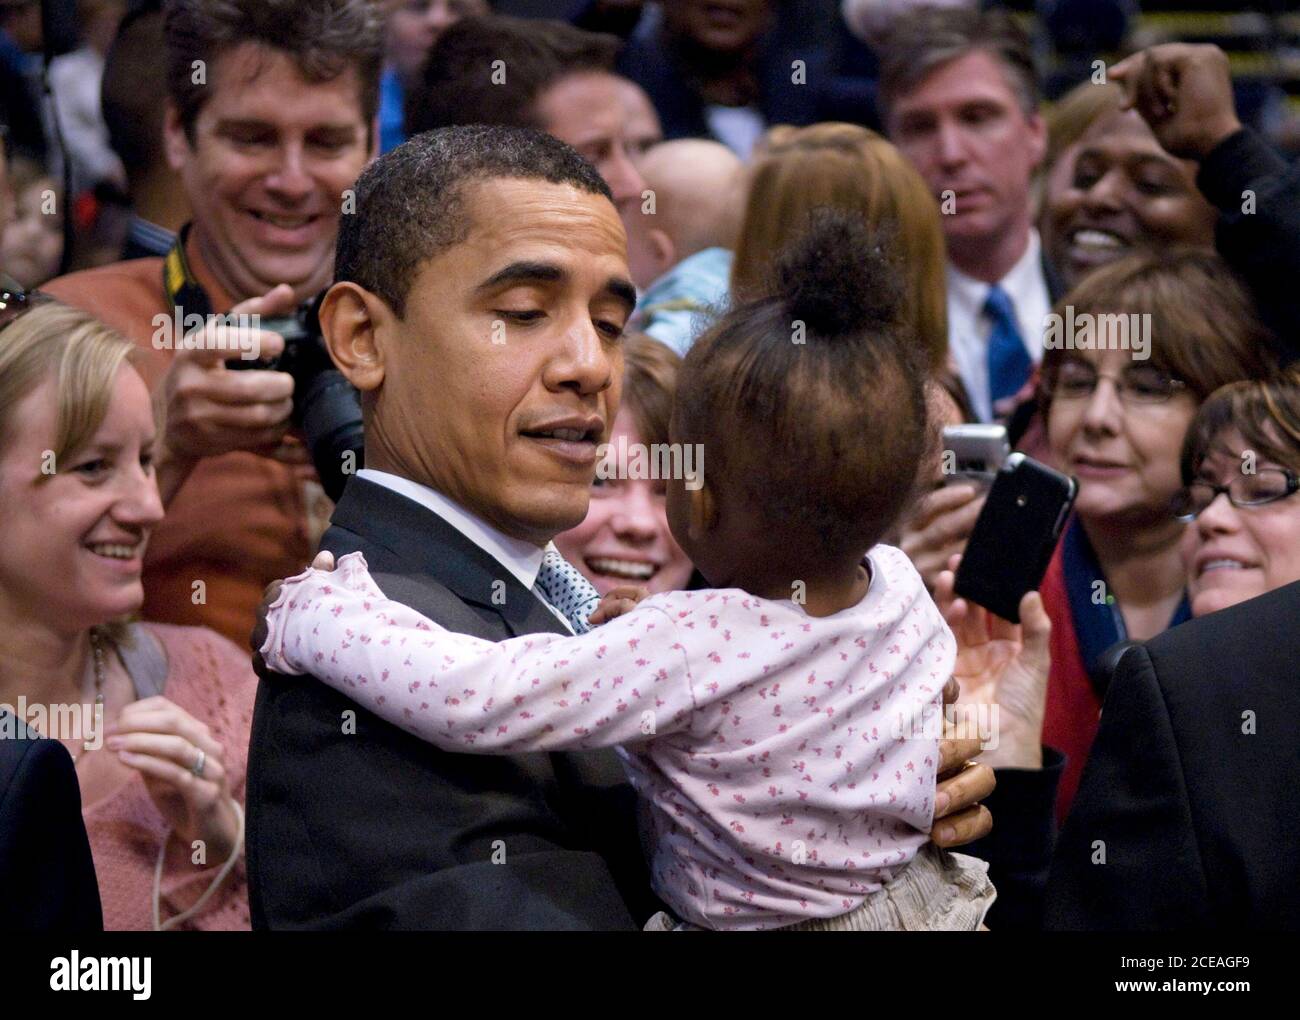 Austin, TX February 28, 2008: Democratic presidential candidate Barack Obama holds a small girl after speaking at an Austin 'town-hall' style event on his economic proposals at the Austin Convention Center. The presidential candidates are descending on Texas in advance of the state's primary next Tuesday. ©Bob Daemmrich Stock Photo